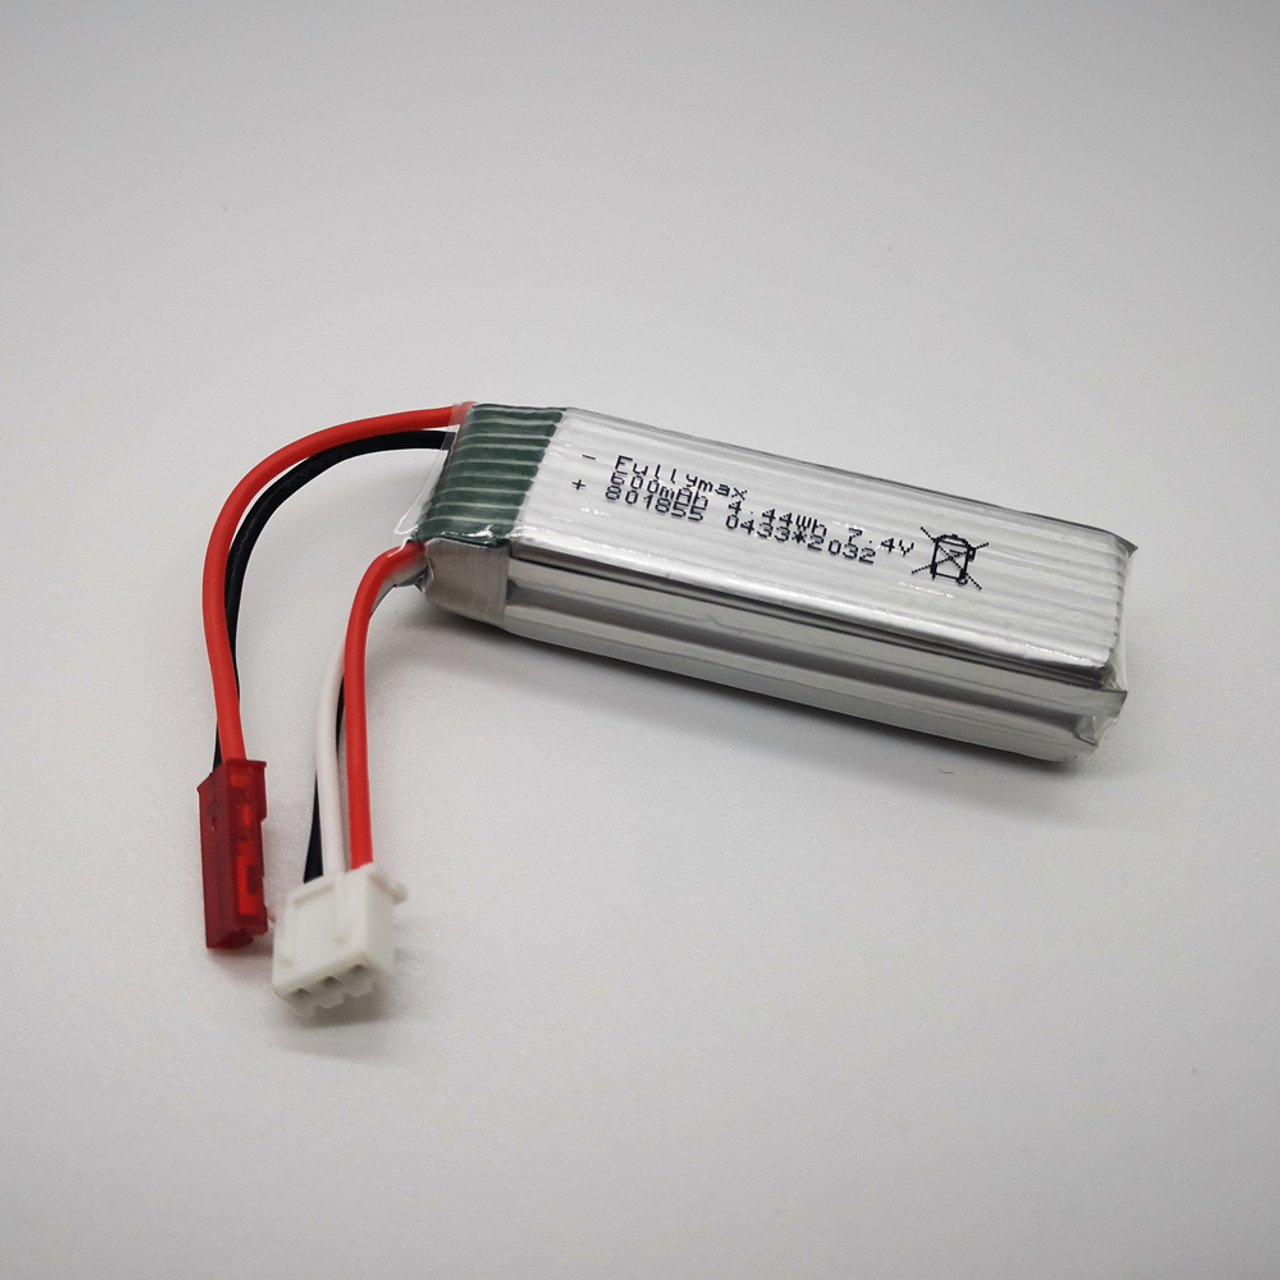 XK A160 original battery 7.4V 600mAh for A160 Fixed Wing RC Airplane